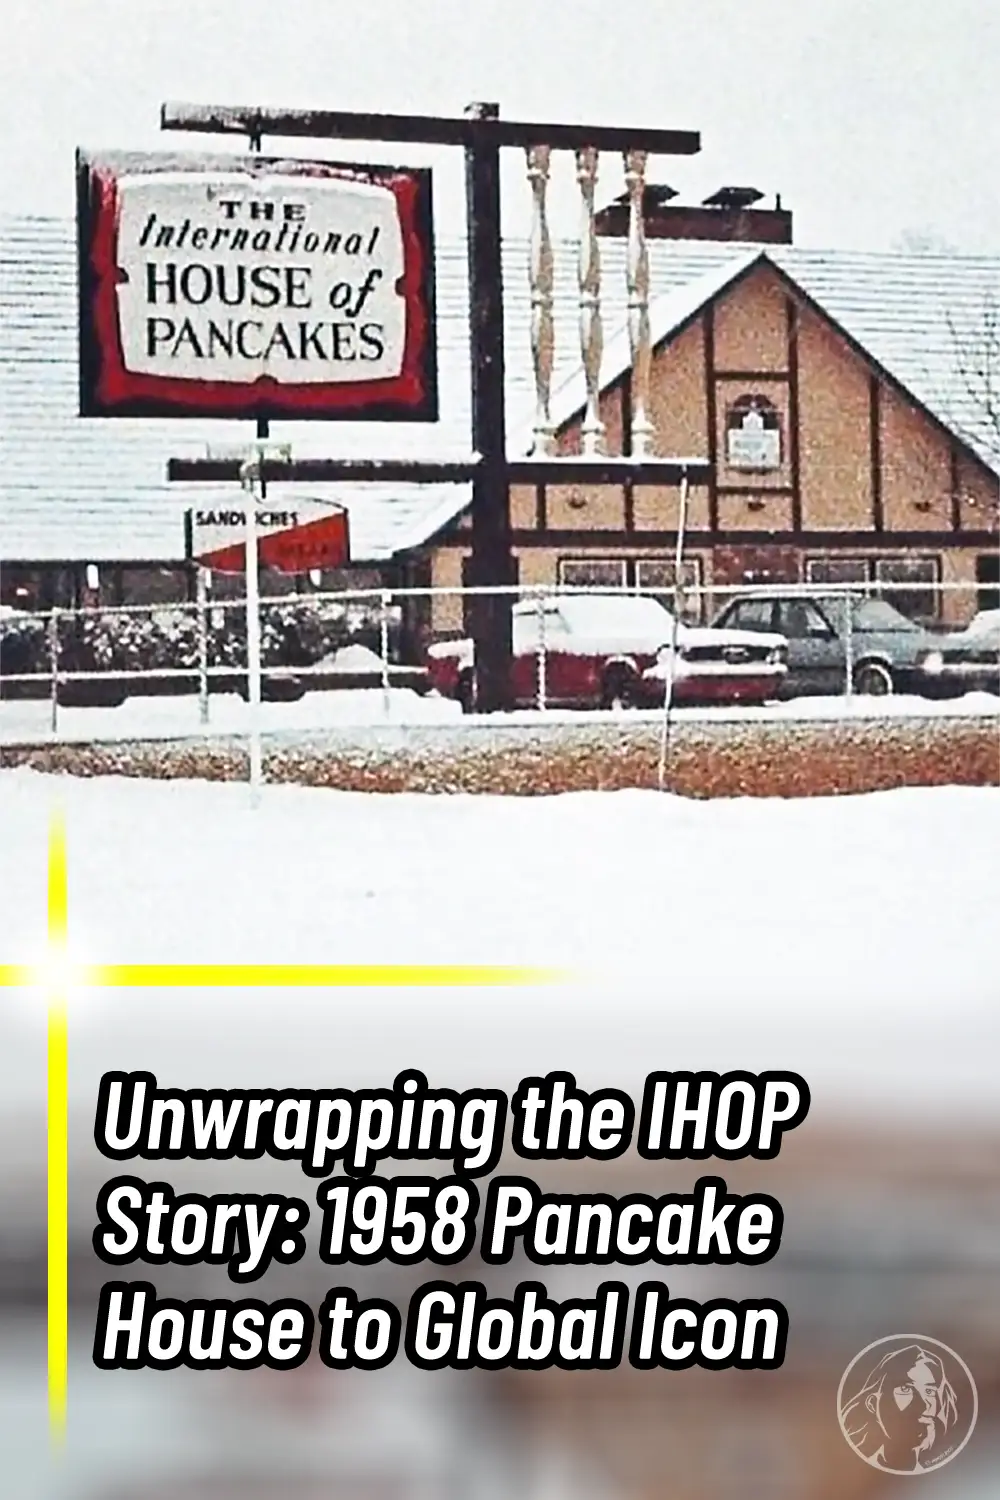 Unwrapping the IHOP Story: 1958 Pancake House to Global Icon